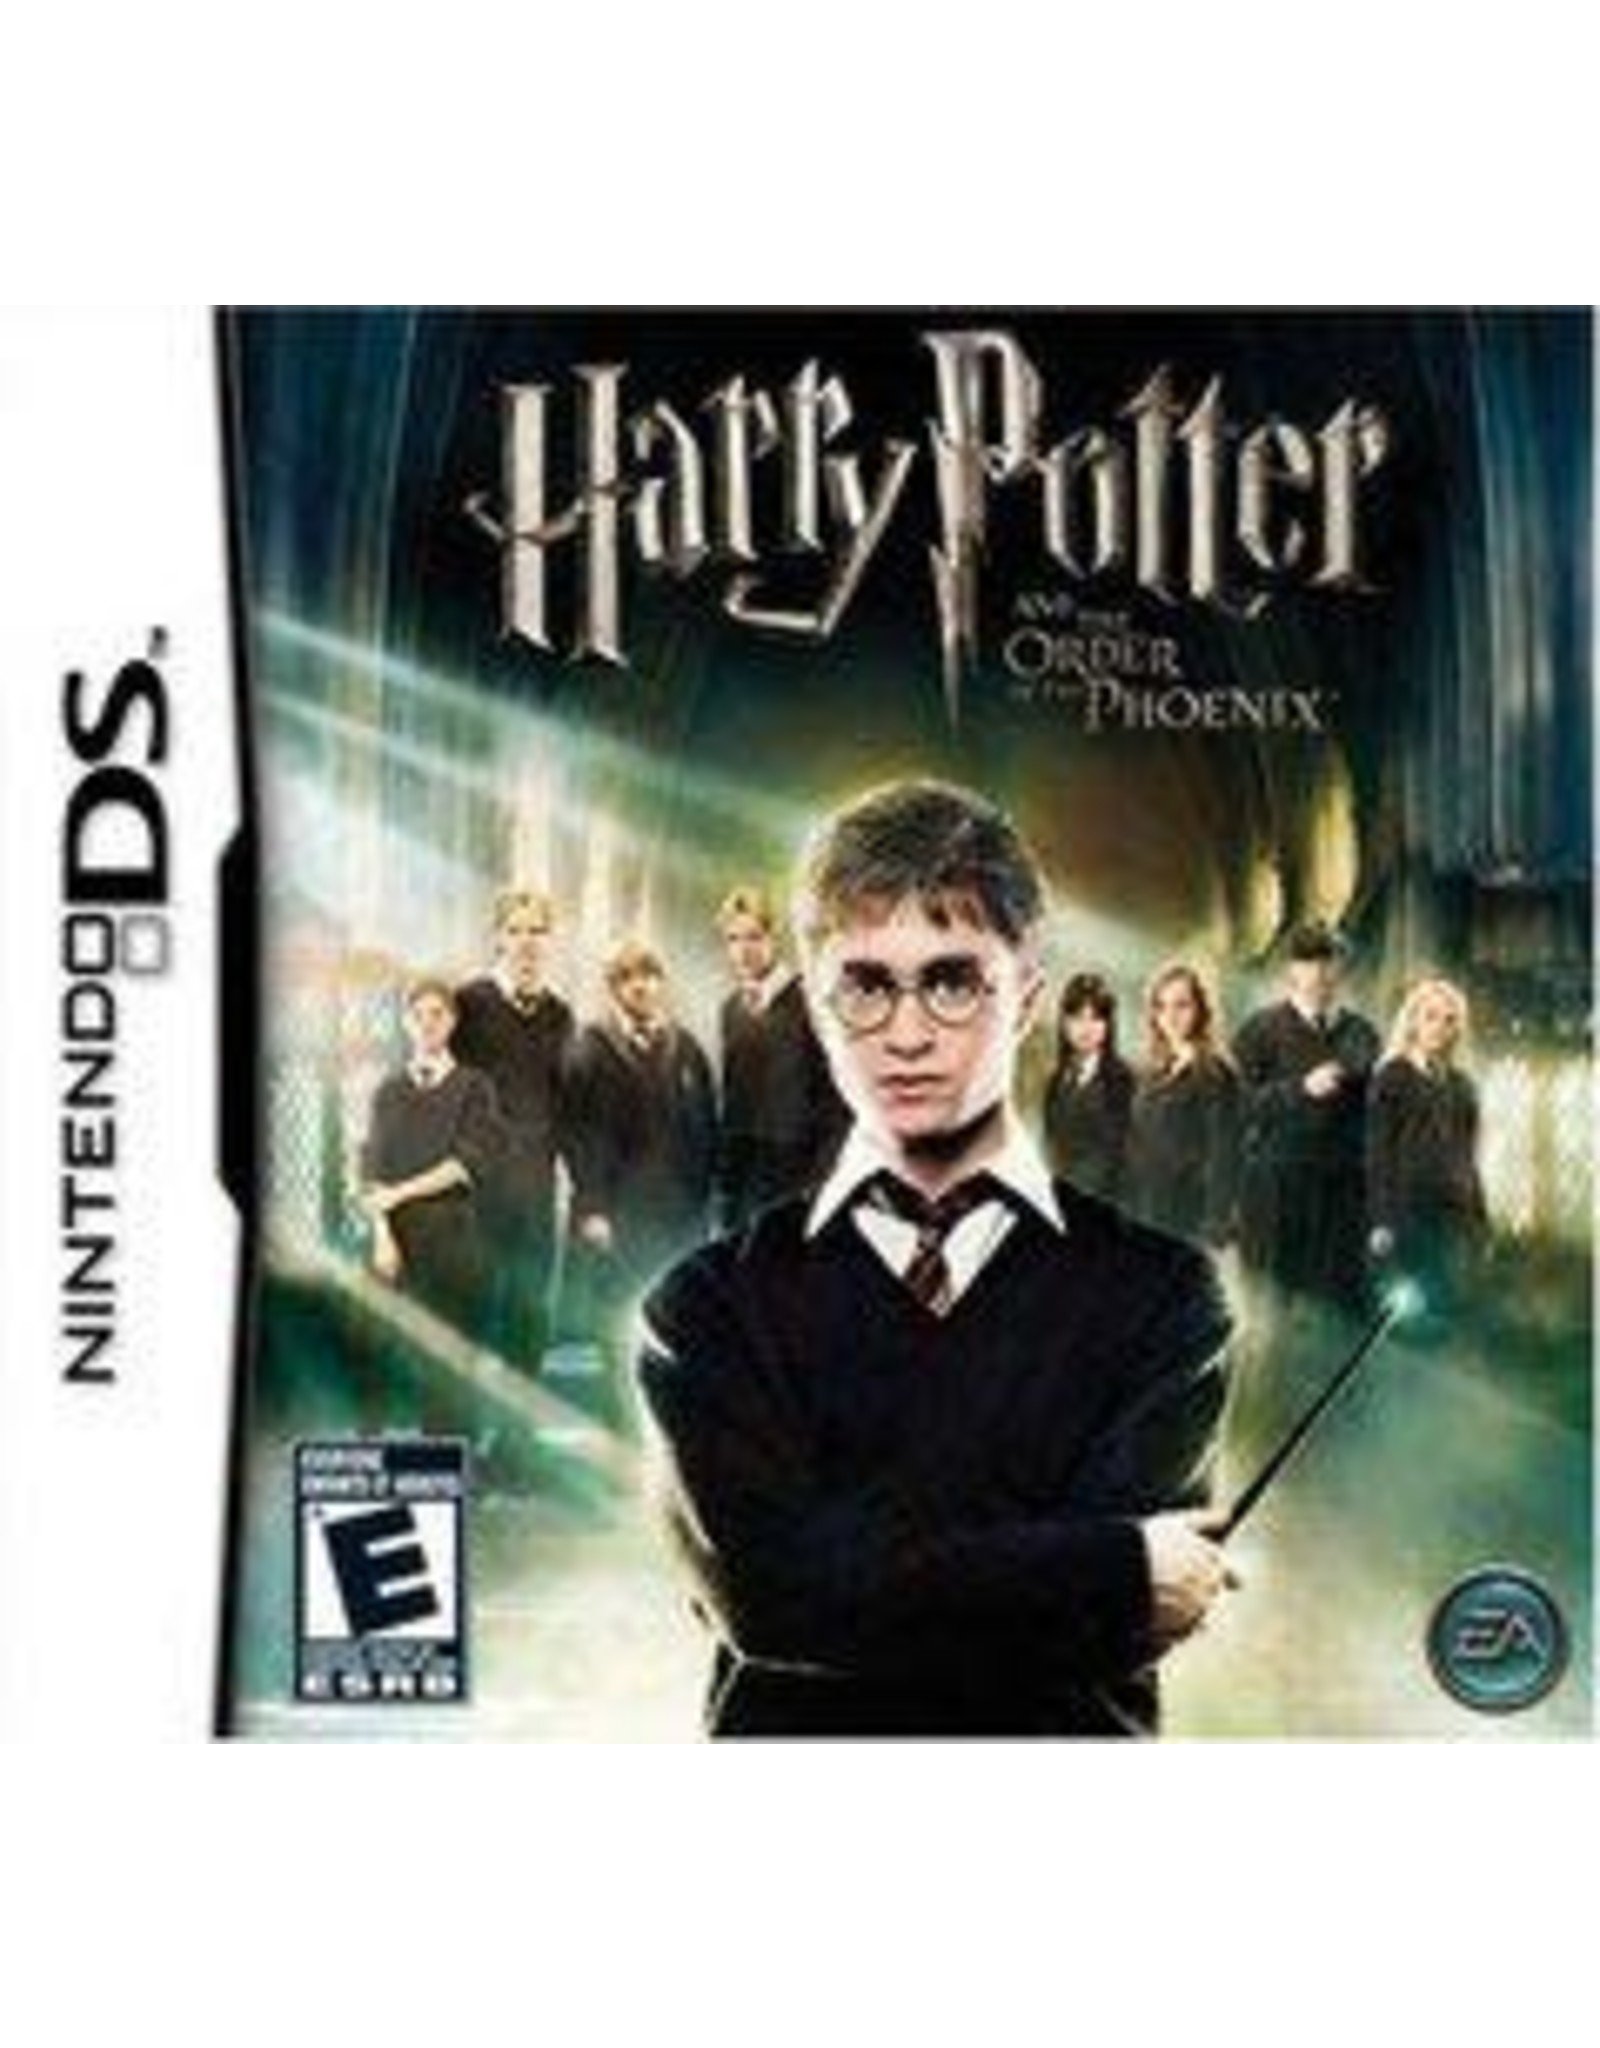 Nintendo DS Harry Potter and the Order of the Phoenix (CiB)